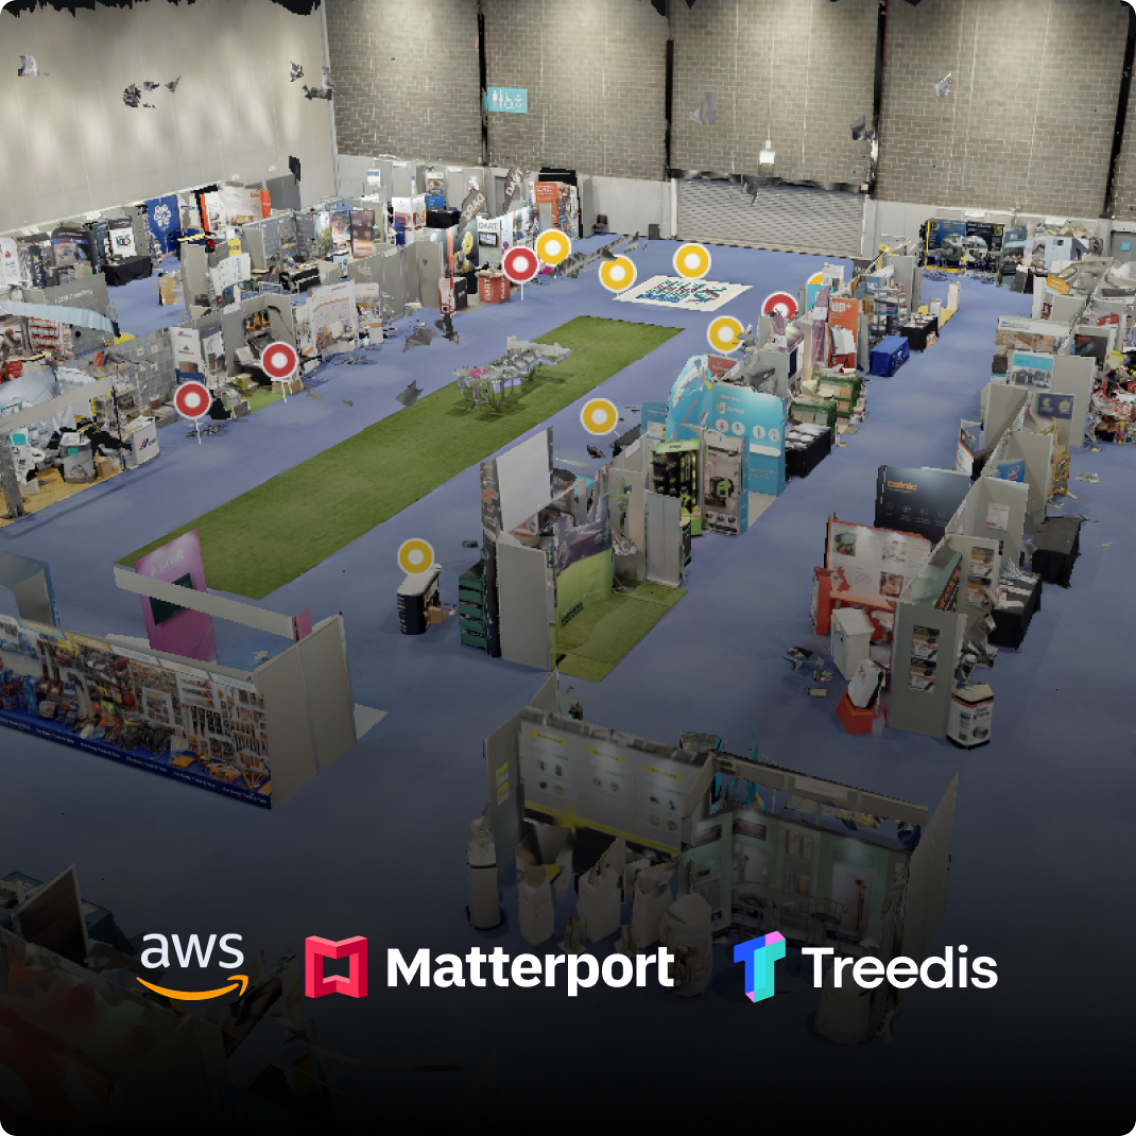 A Matterport model with the AWS, Matterport, and Treedis logos at the bottom